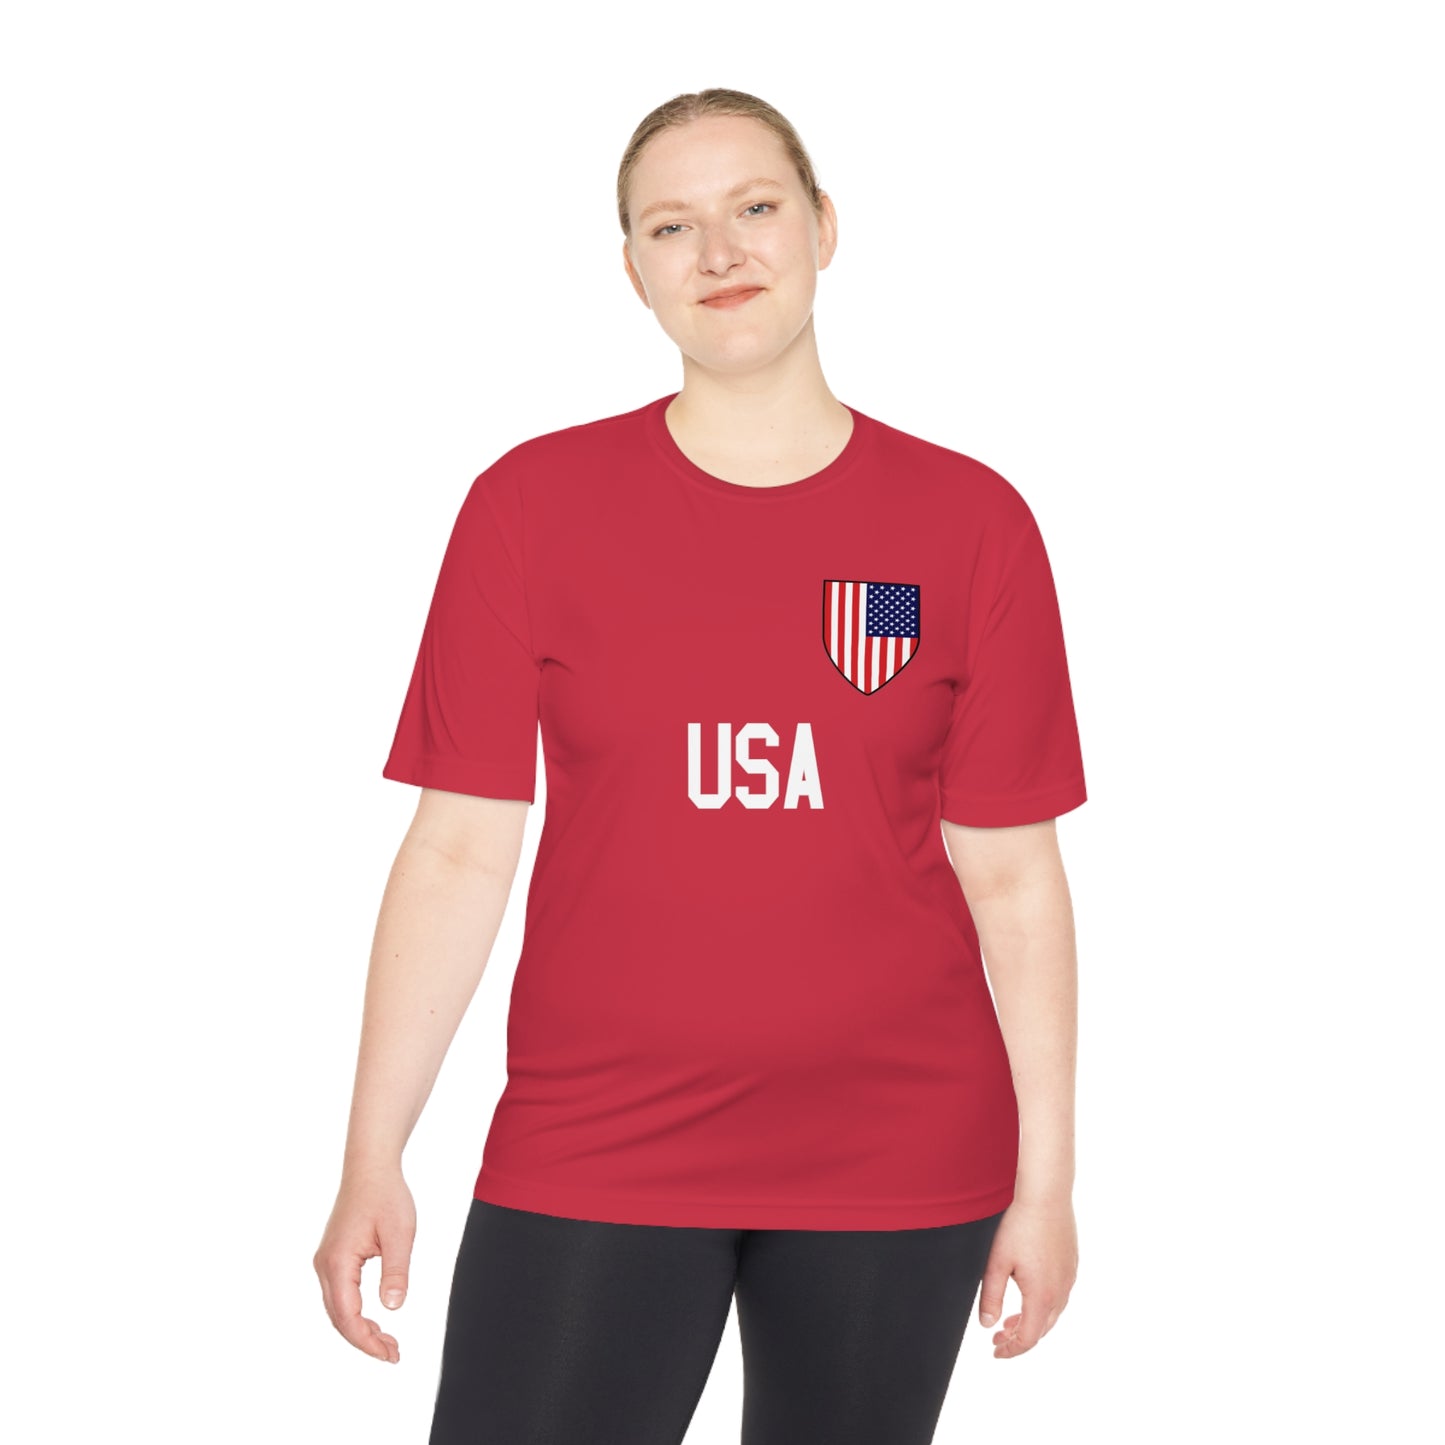 USA Soccer t-shirt with Soccer Shield USA Flag design and USA in block lettering